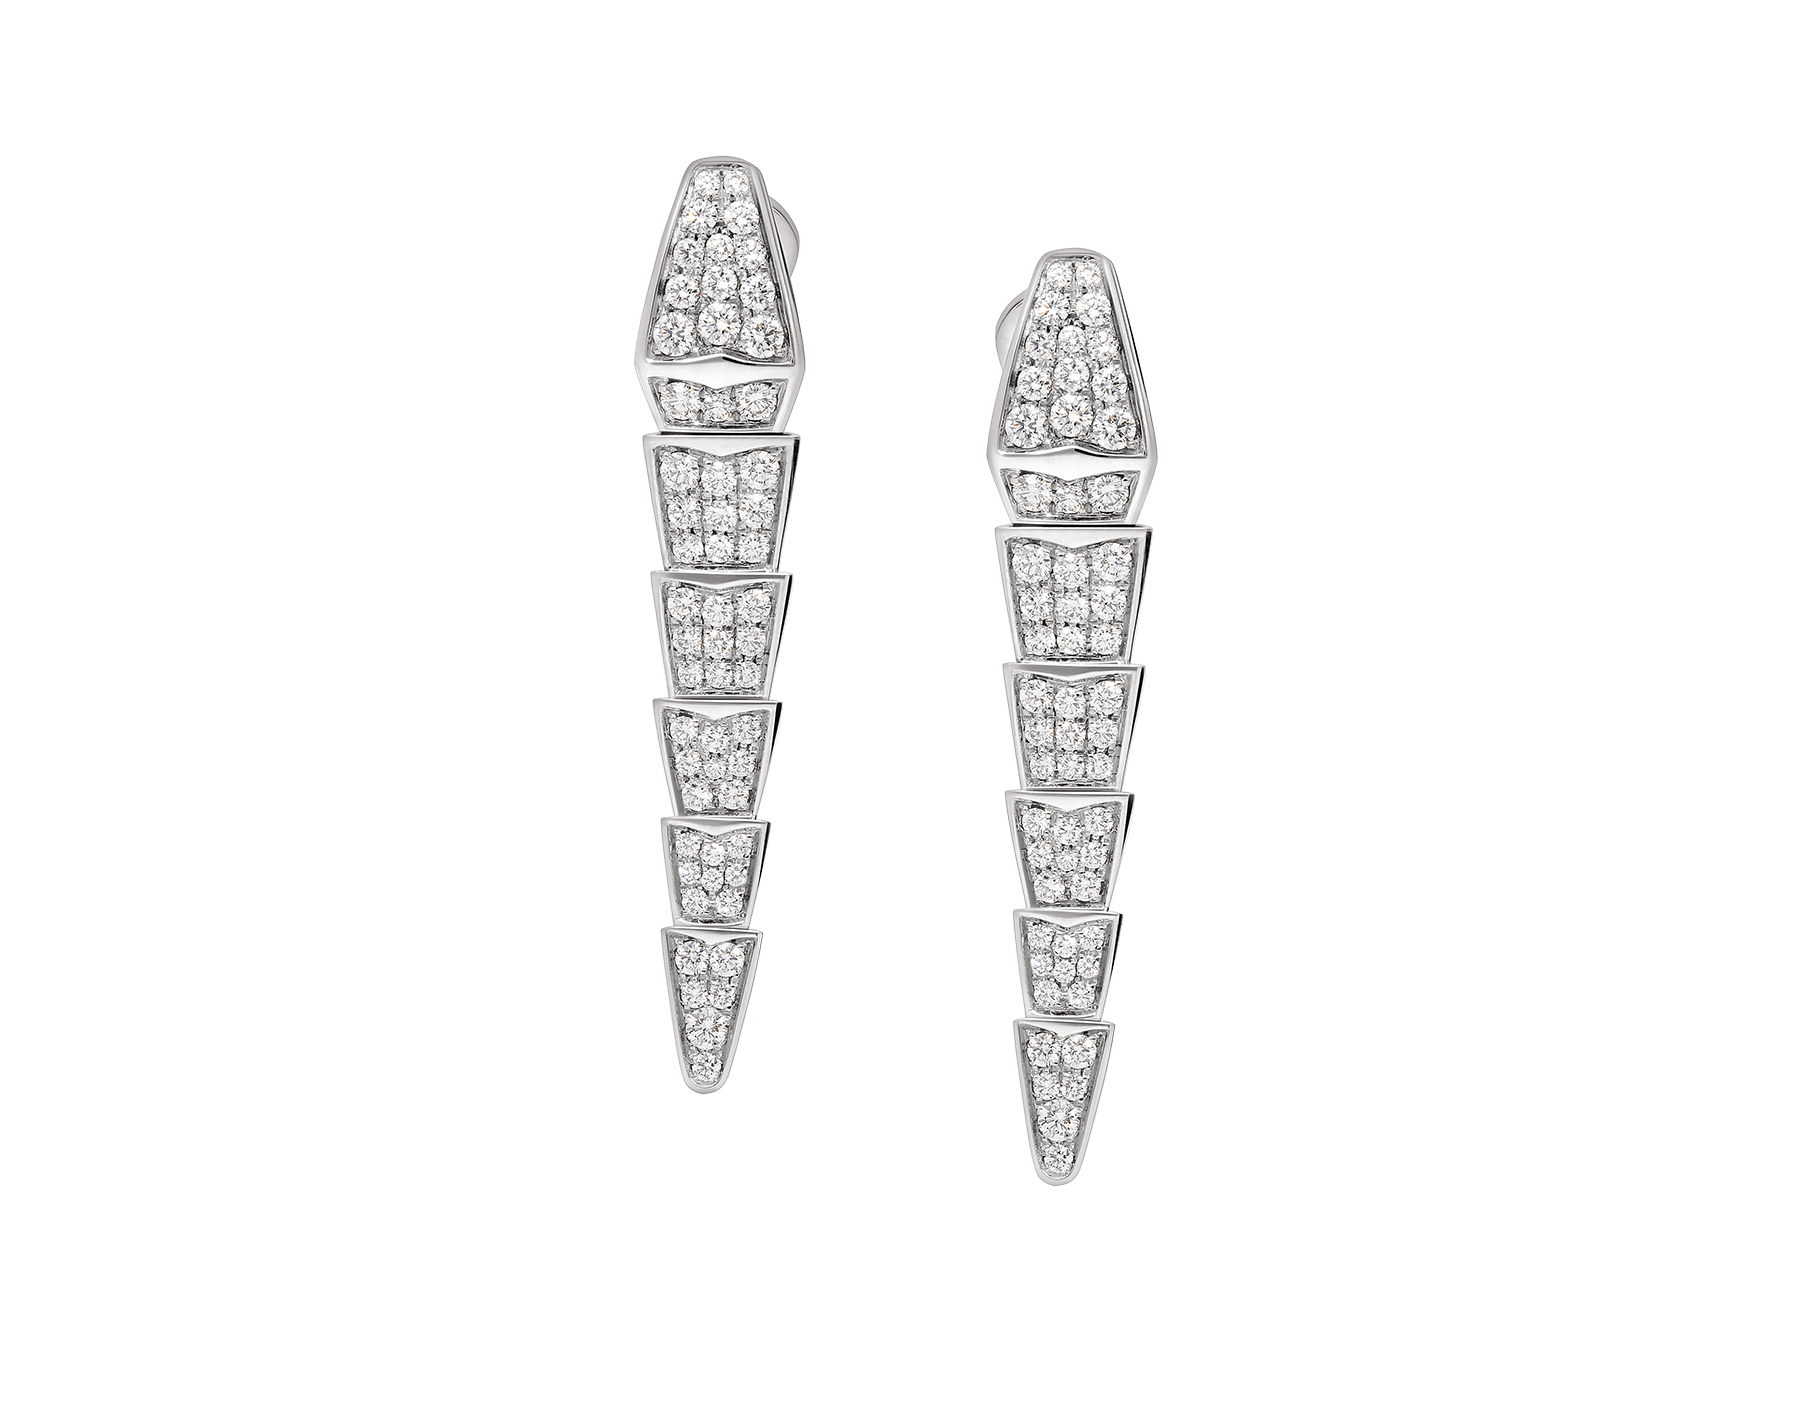 Serpenti Viper earrigns in 18 kt white gold, set with full pavé diamonds. 348320 image 1